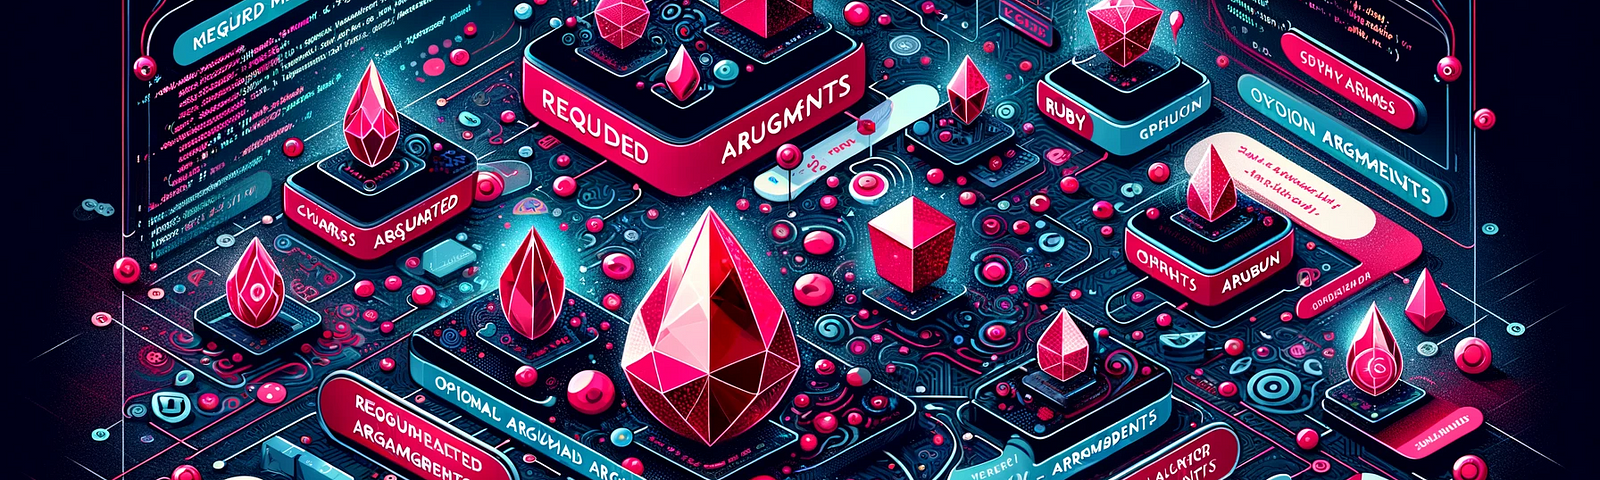 An image exploring the intricacies of Ruby method arguments. It features abstract representations for different argument types like required, optional, keyword, and variable-length arguments, each with distinctive shapes or patterns. Ruby-colored gemstones symbolize the Ruby language, set against a digital, code-themed background with snippets of Ruby code. The design, blending reds, pinks, and digital blues, creates a vibrant, educational look into Ruby’s argument handling.